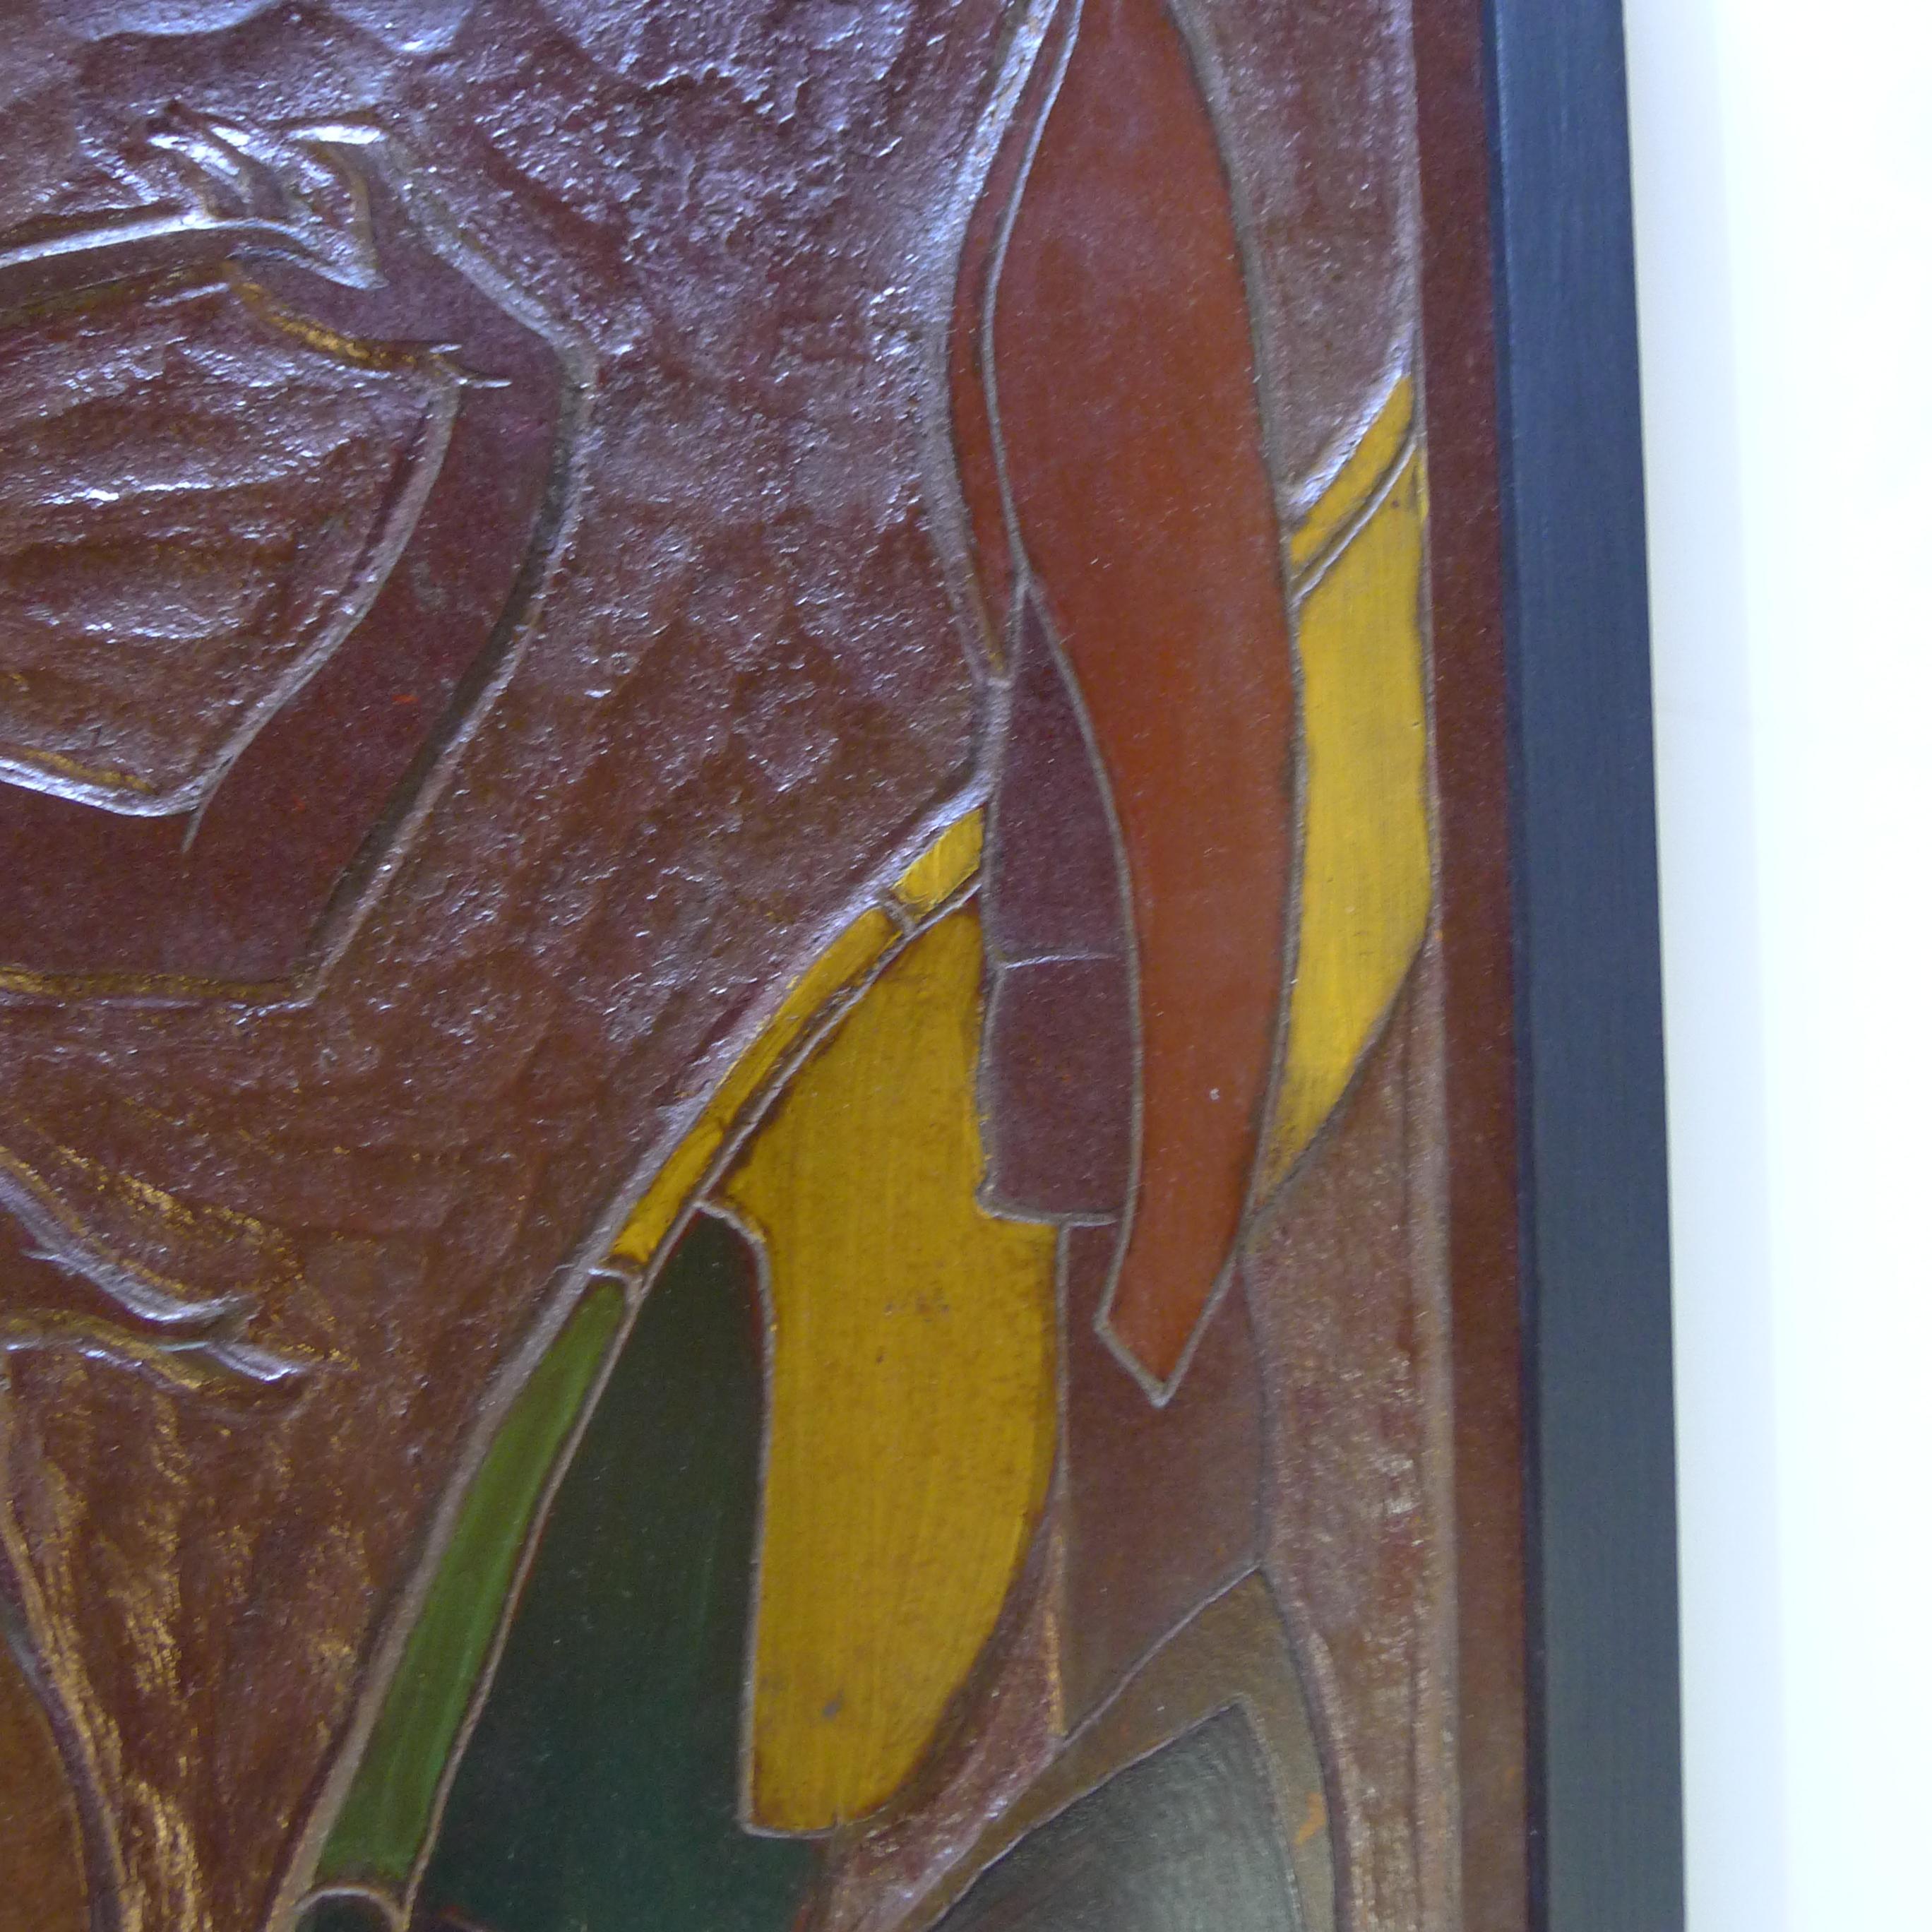 Africana Tribal Relief Panel Art Signed Jan De Swart In Excellent Condition For Sale In Los Angeles, CA